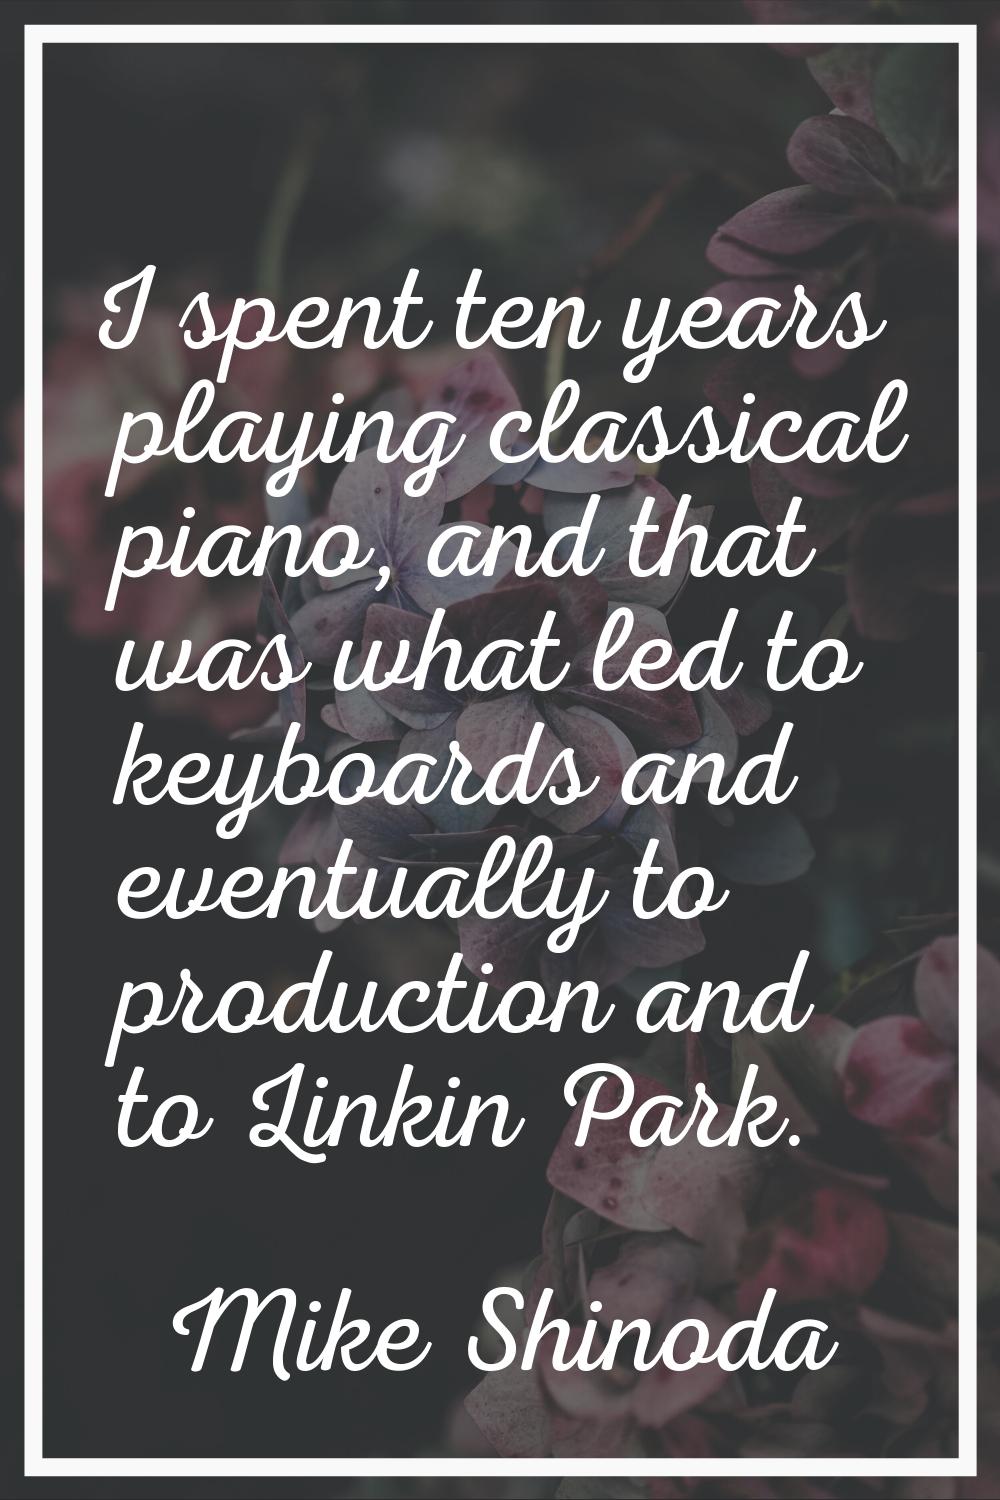 I spent ten years playing classical piano, and that was what led to keyboards and eventually to pro